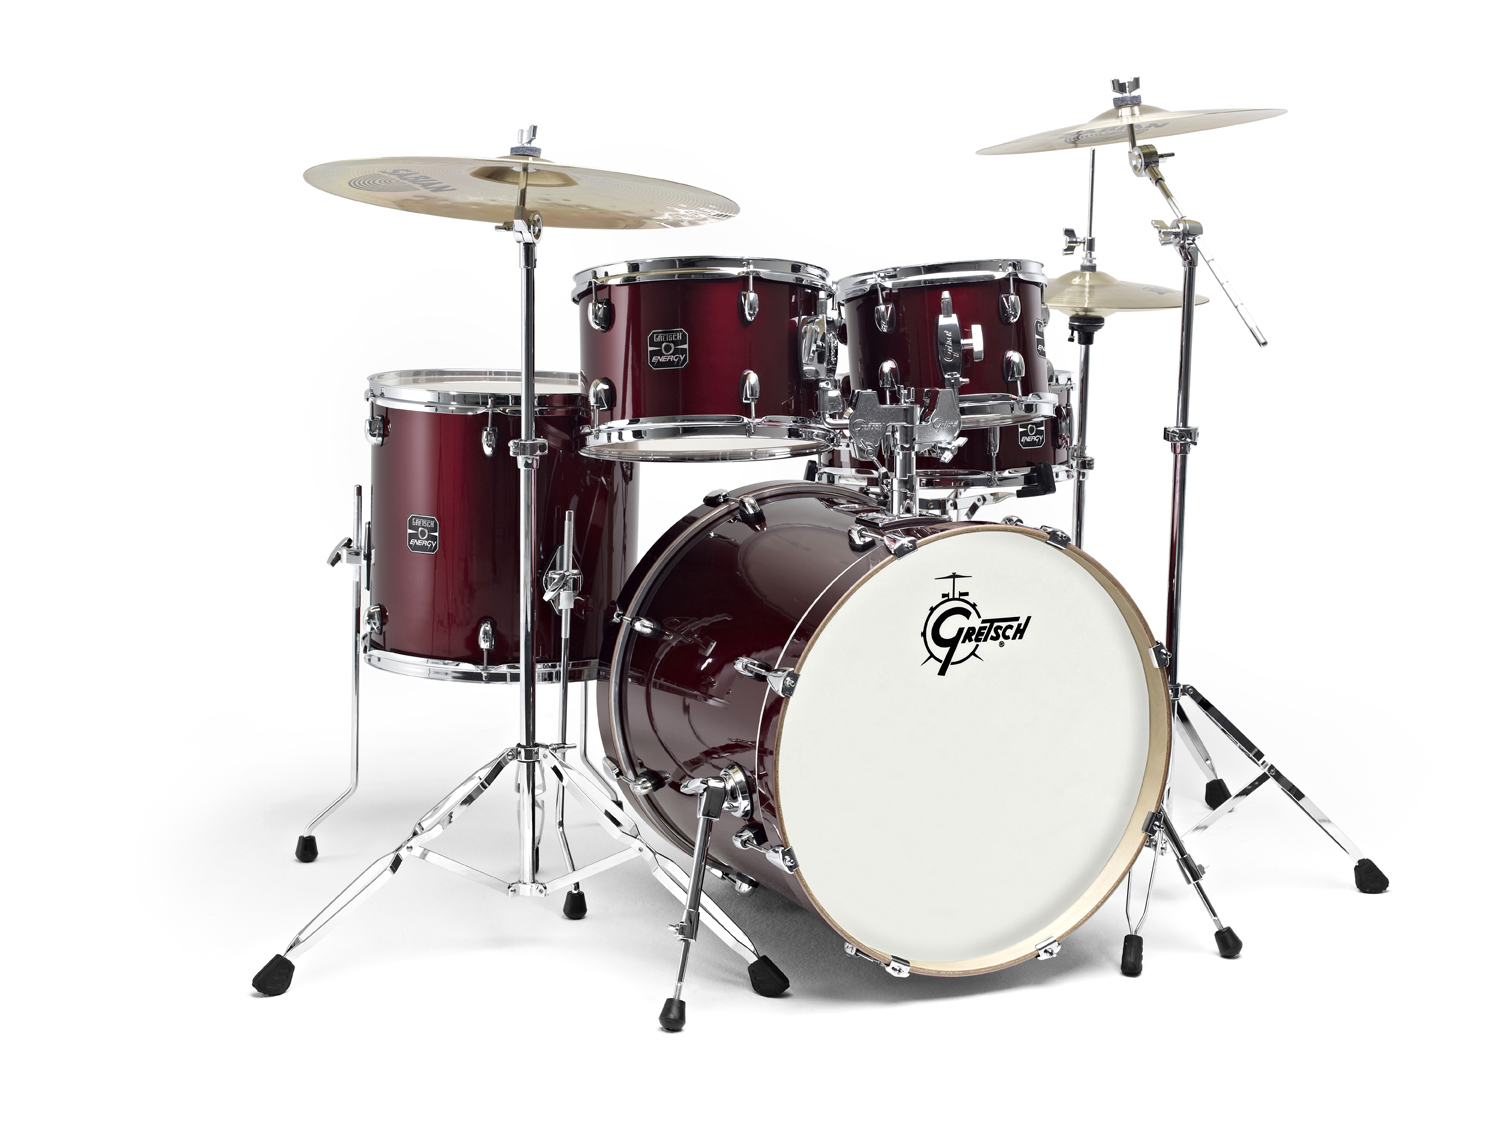 GRETSCH DRUMS GE2-E605TK-WR- NEW ENERGY FUSION 20